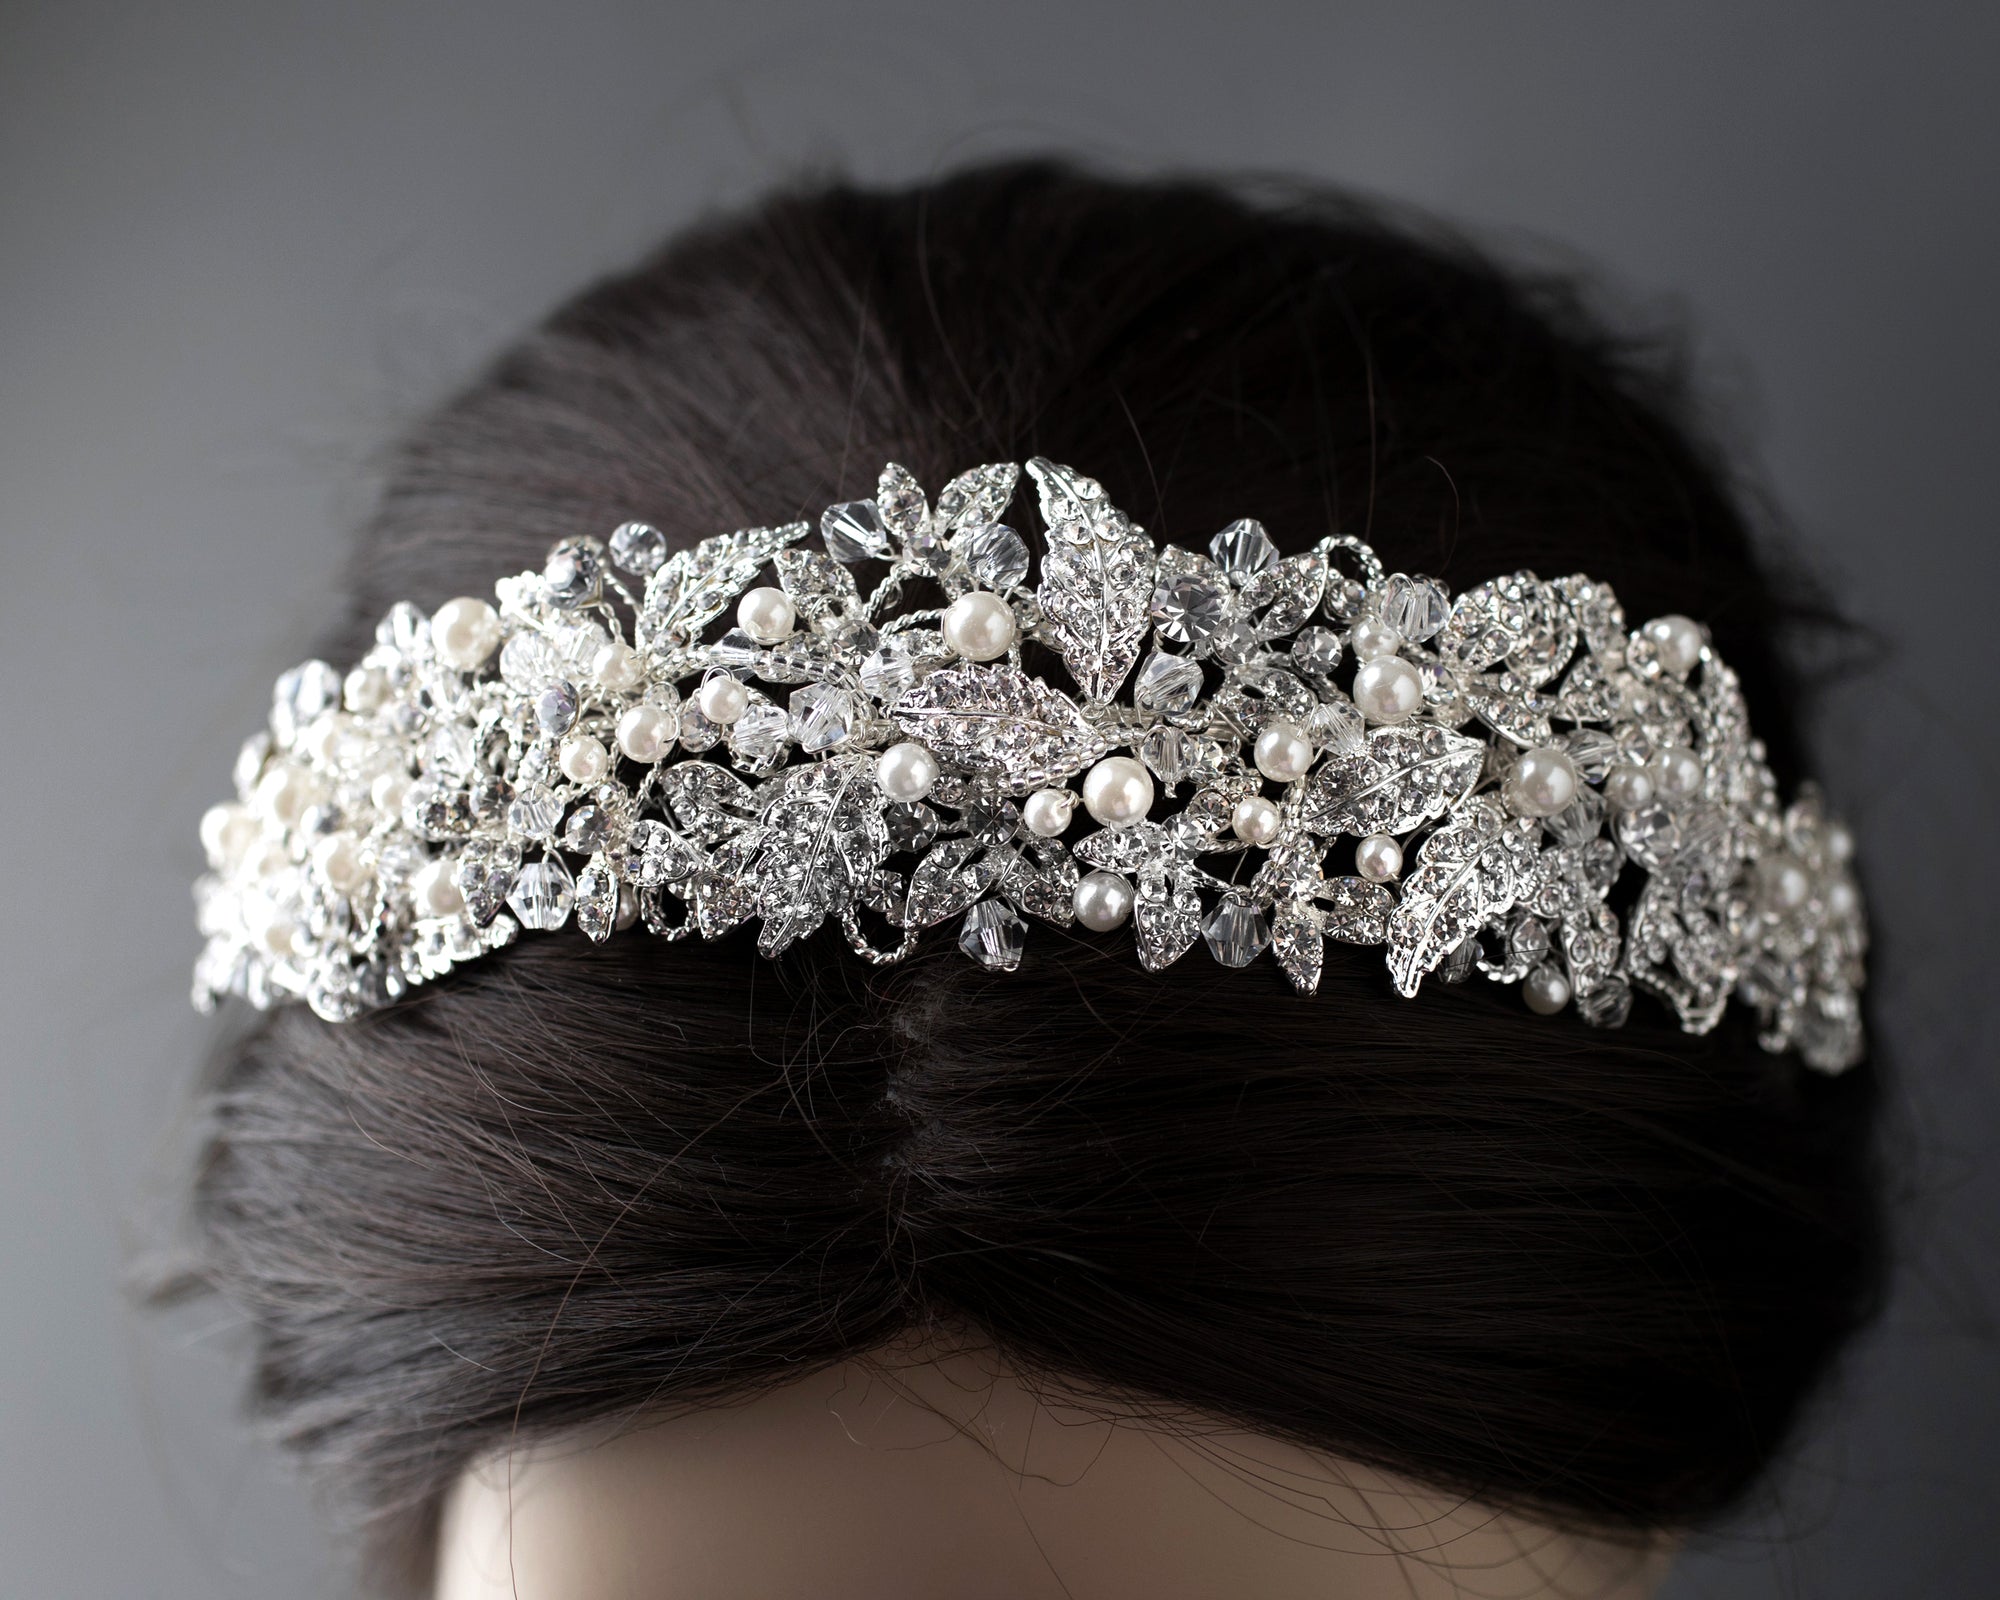 Luxurious Bridal Headpiece of Crystals and Pearls - Cassandra Lynne